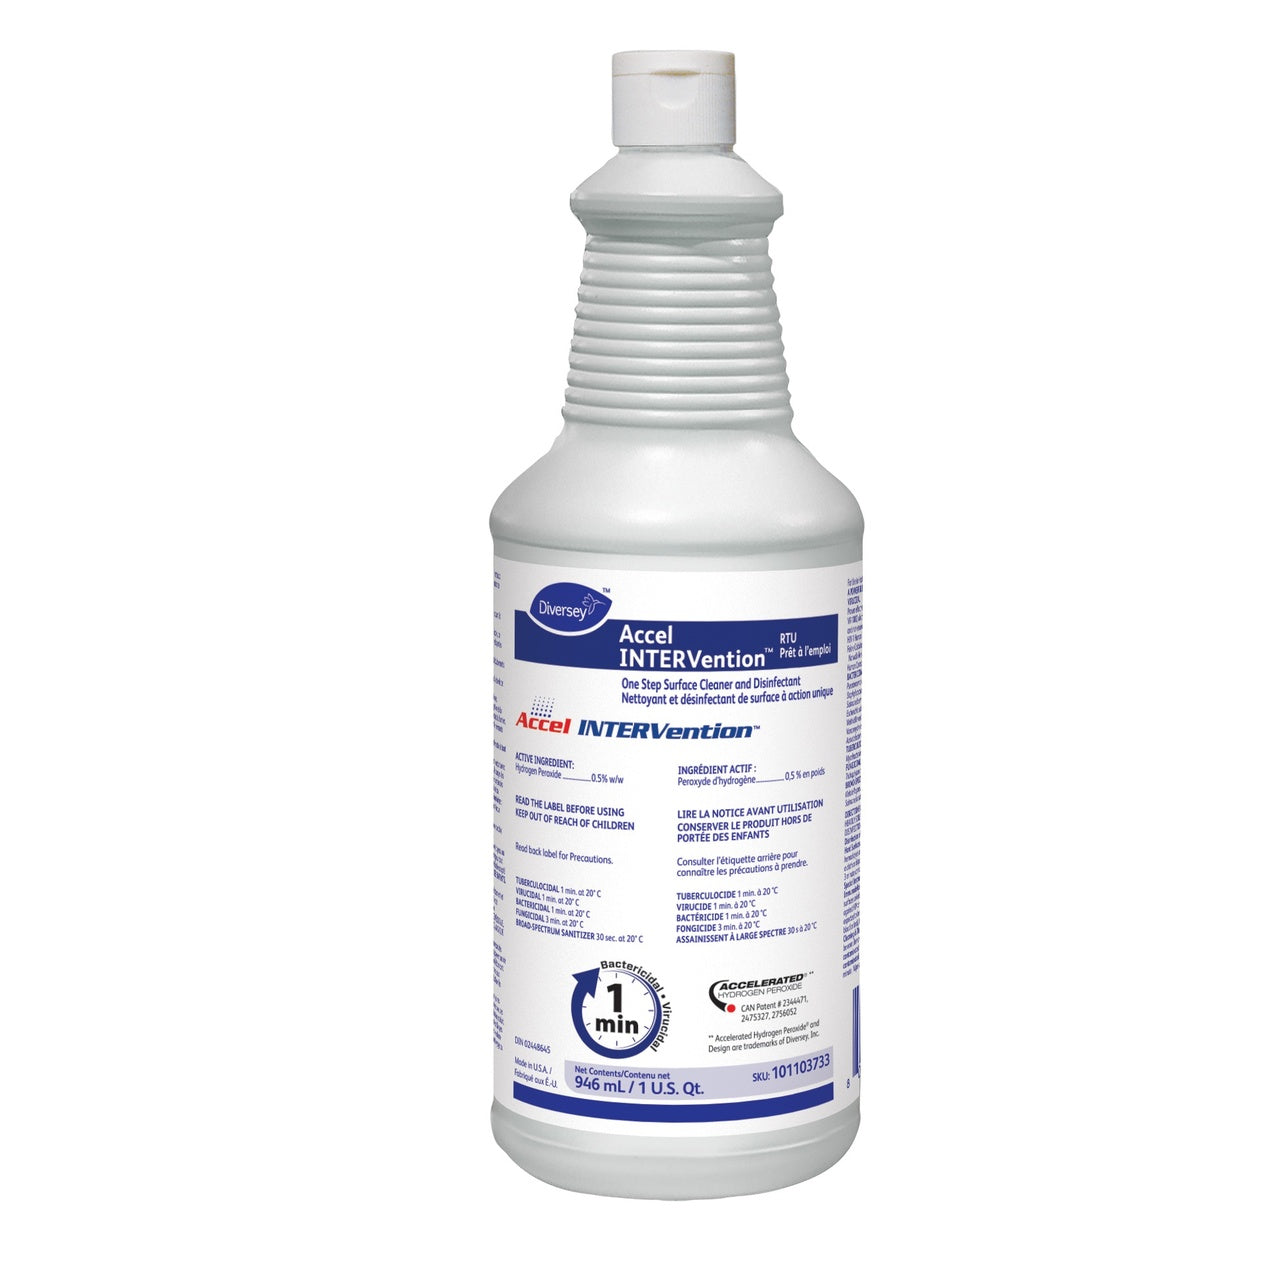 Accel Tb Disinfectant 5 Minute Ready To Use 946ml - Ea/1 - Home Health Store Inc